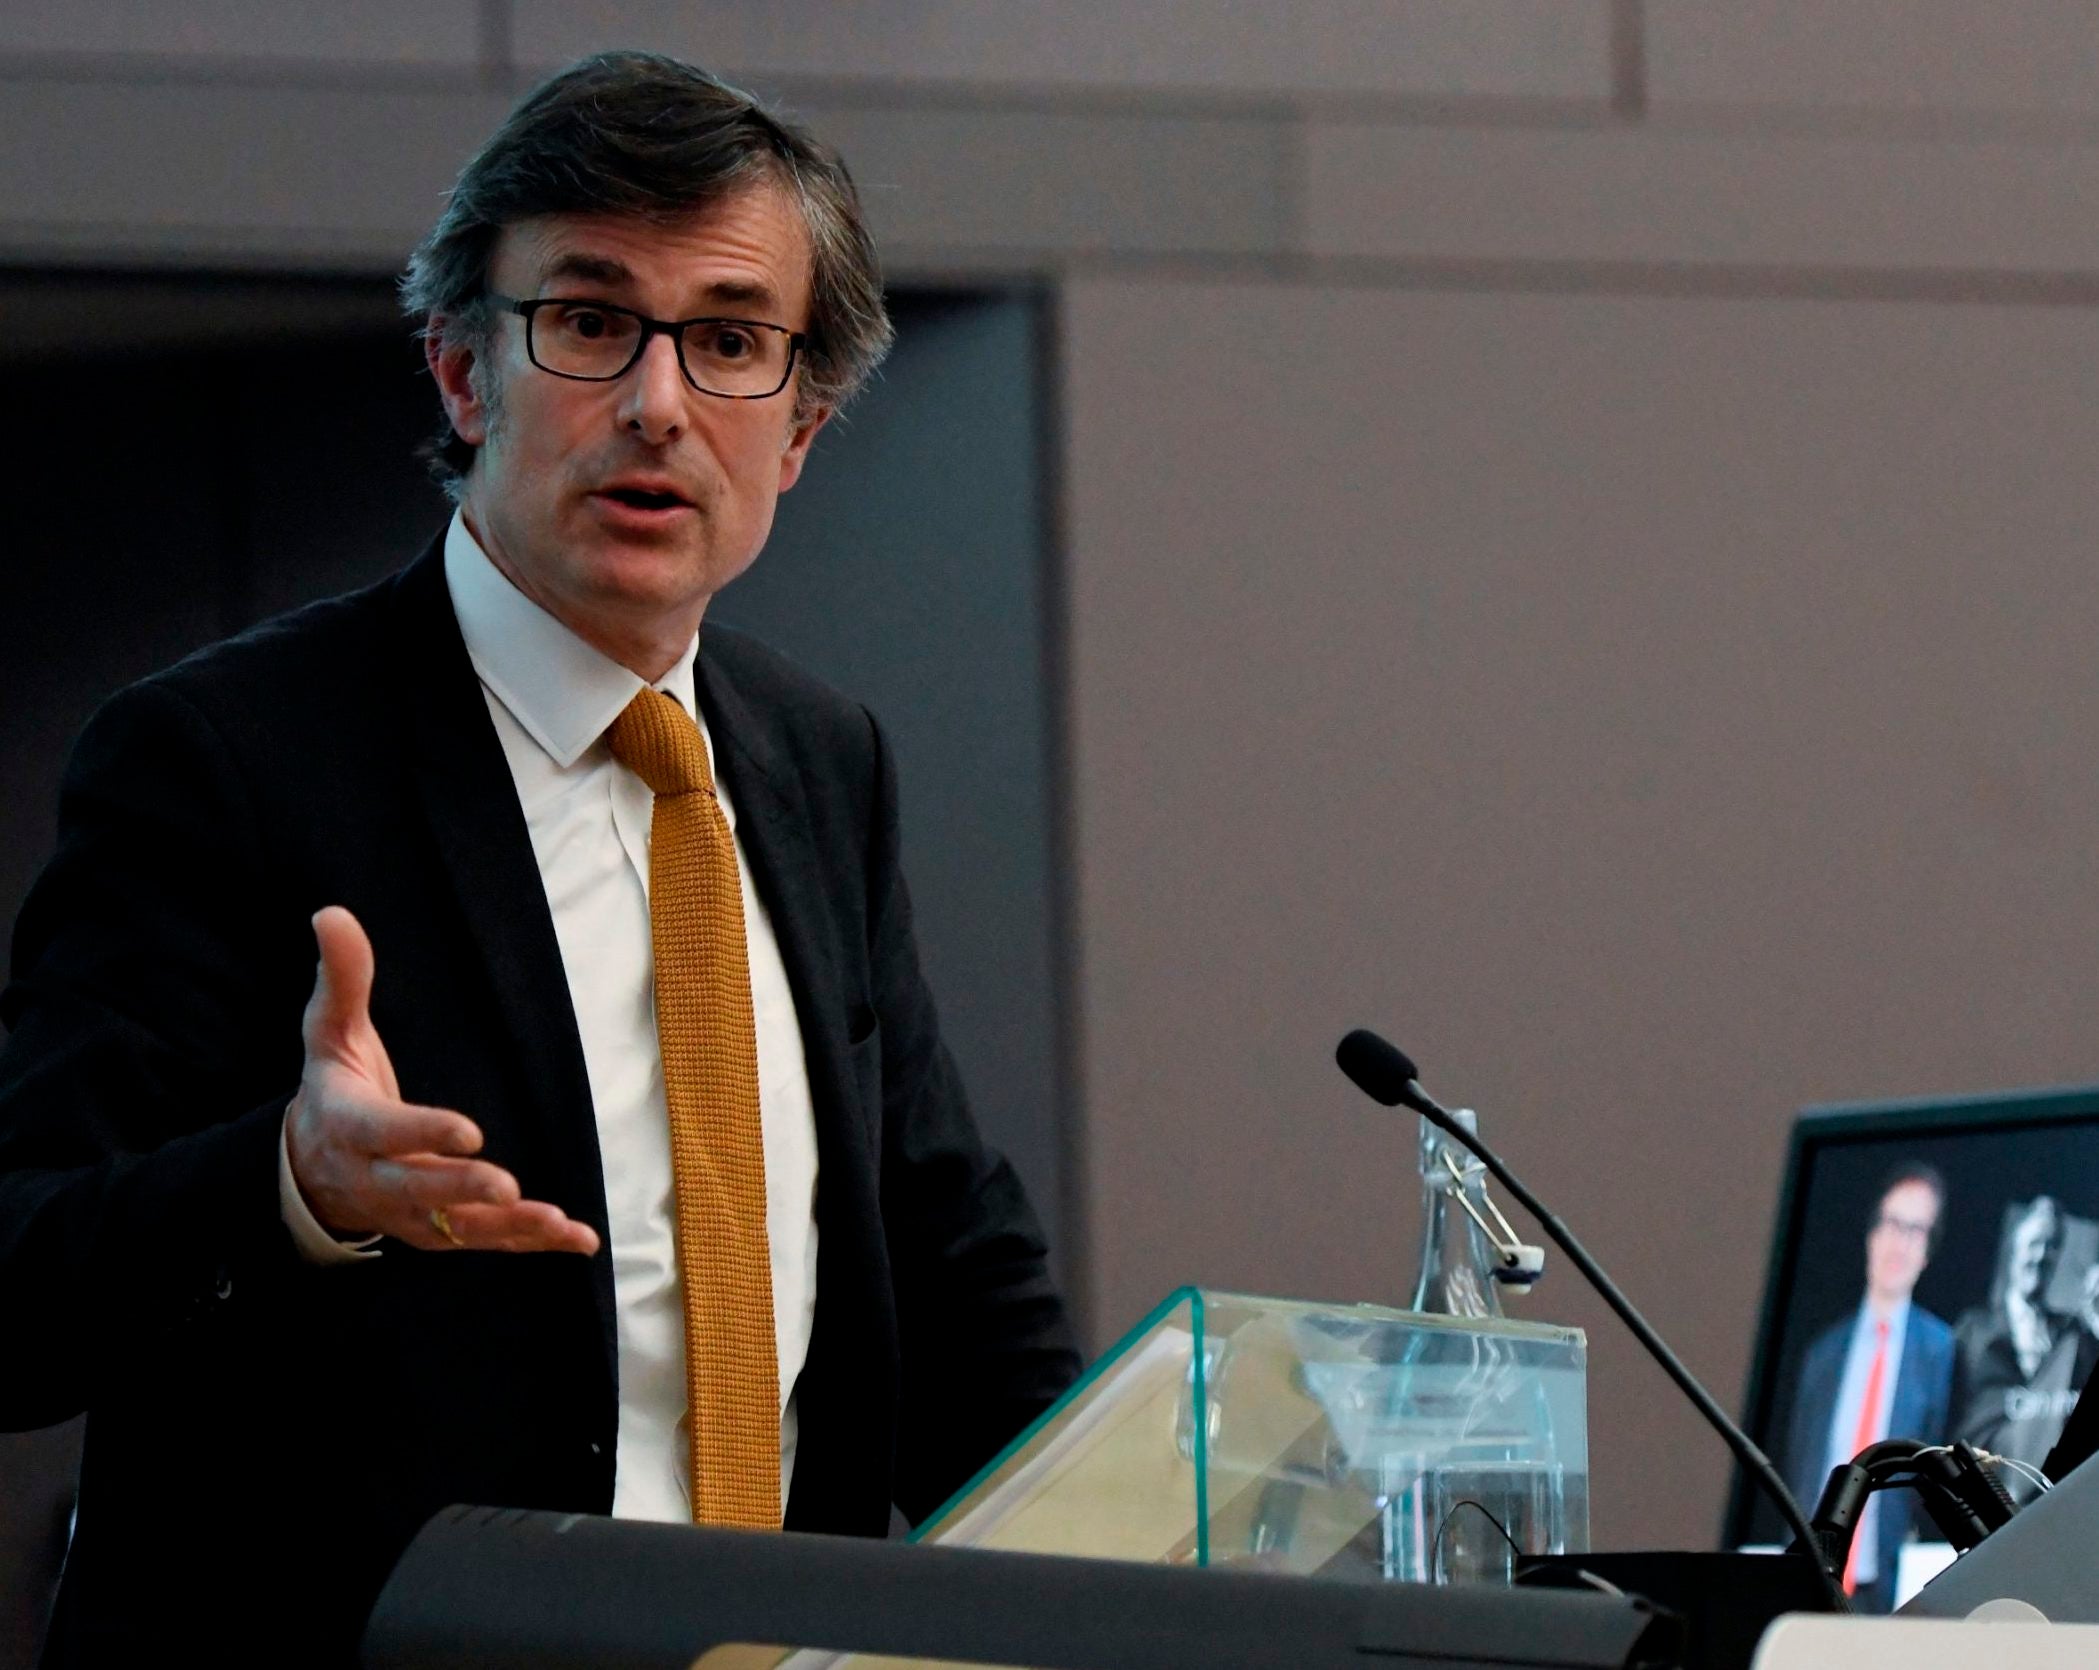 Robert Peston: 'Now I feel I have to say I'm Jewish when reporting on Labour anti-Semitism claims'